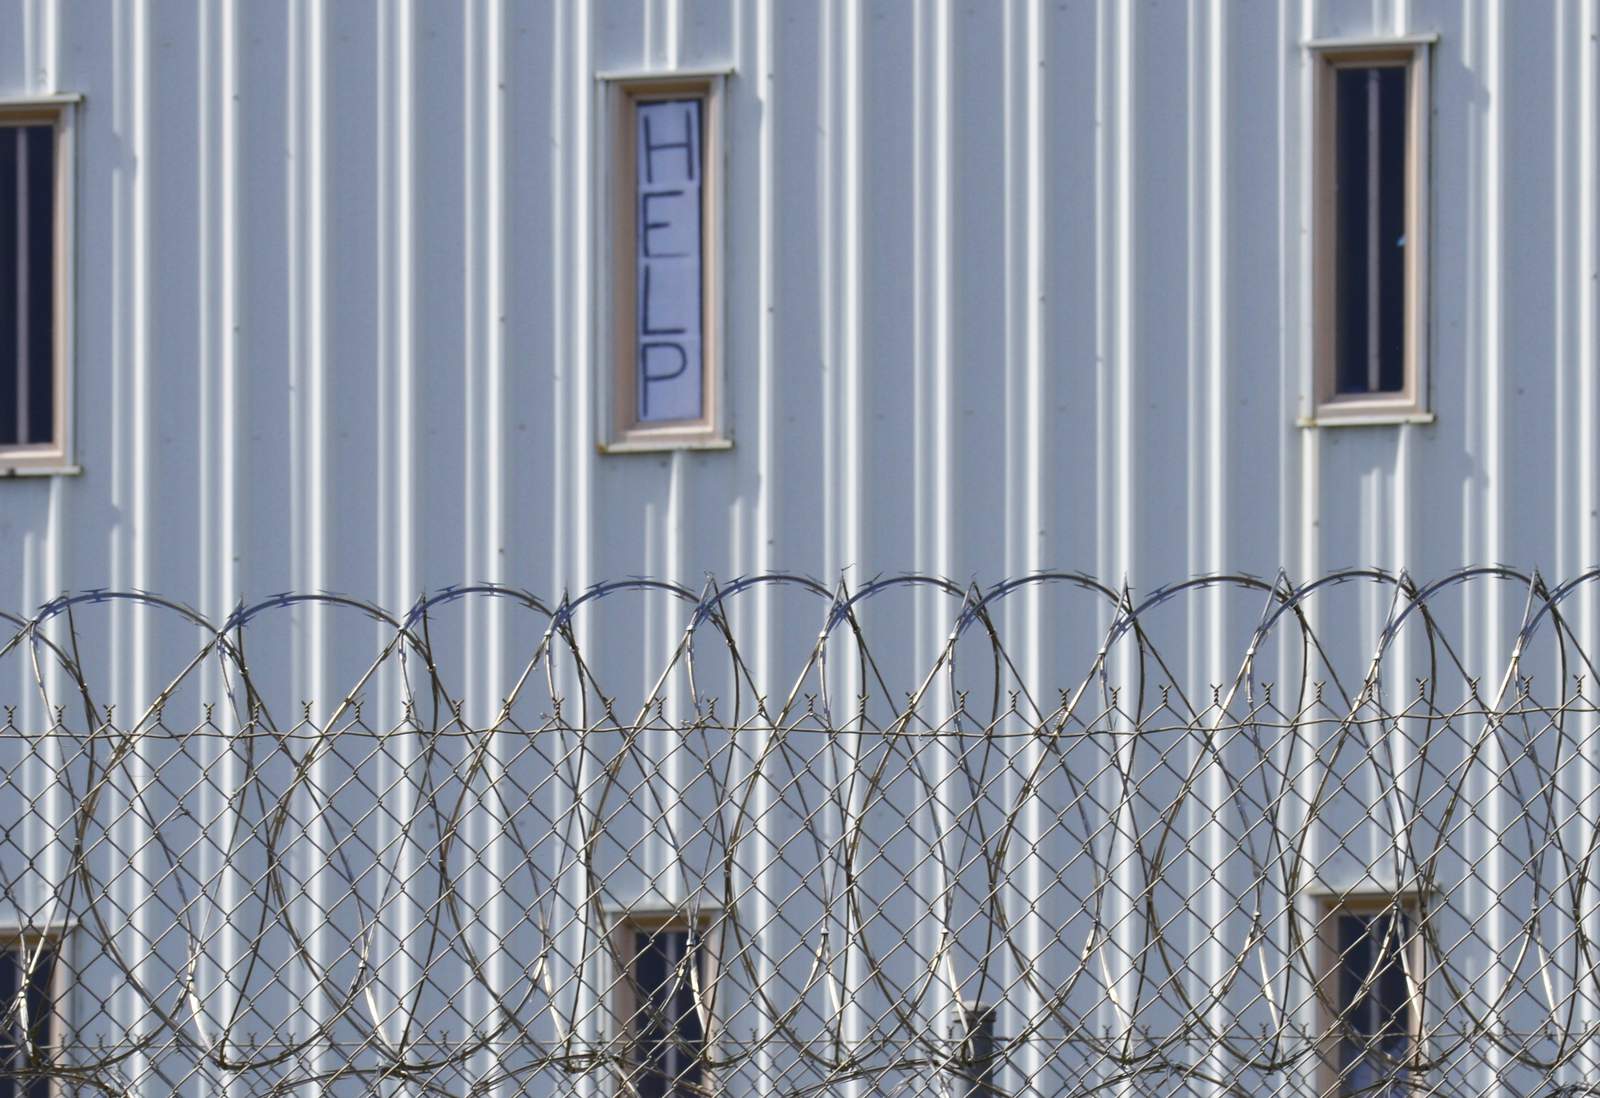 Alabama prisons agency says federal suit ignores progress